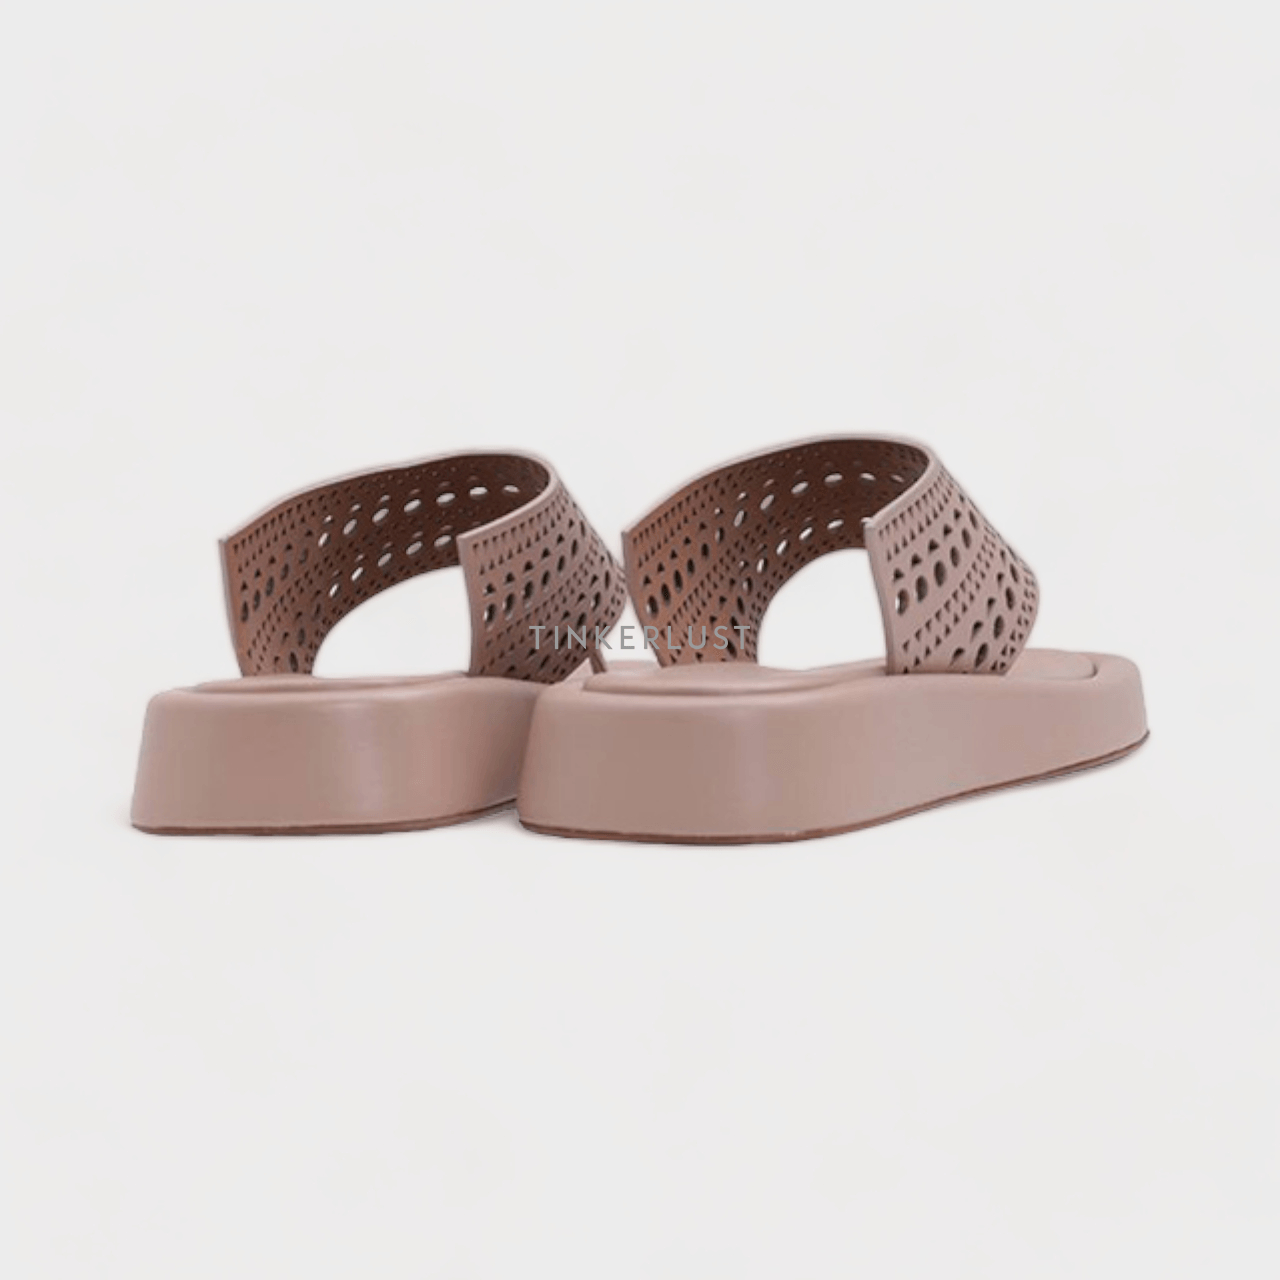 ALAIA Women Lasered Cut Thong in Nude Sandals 